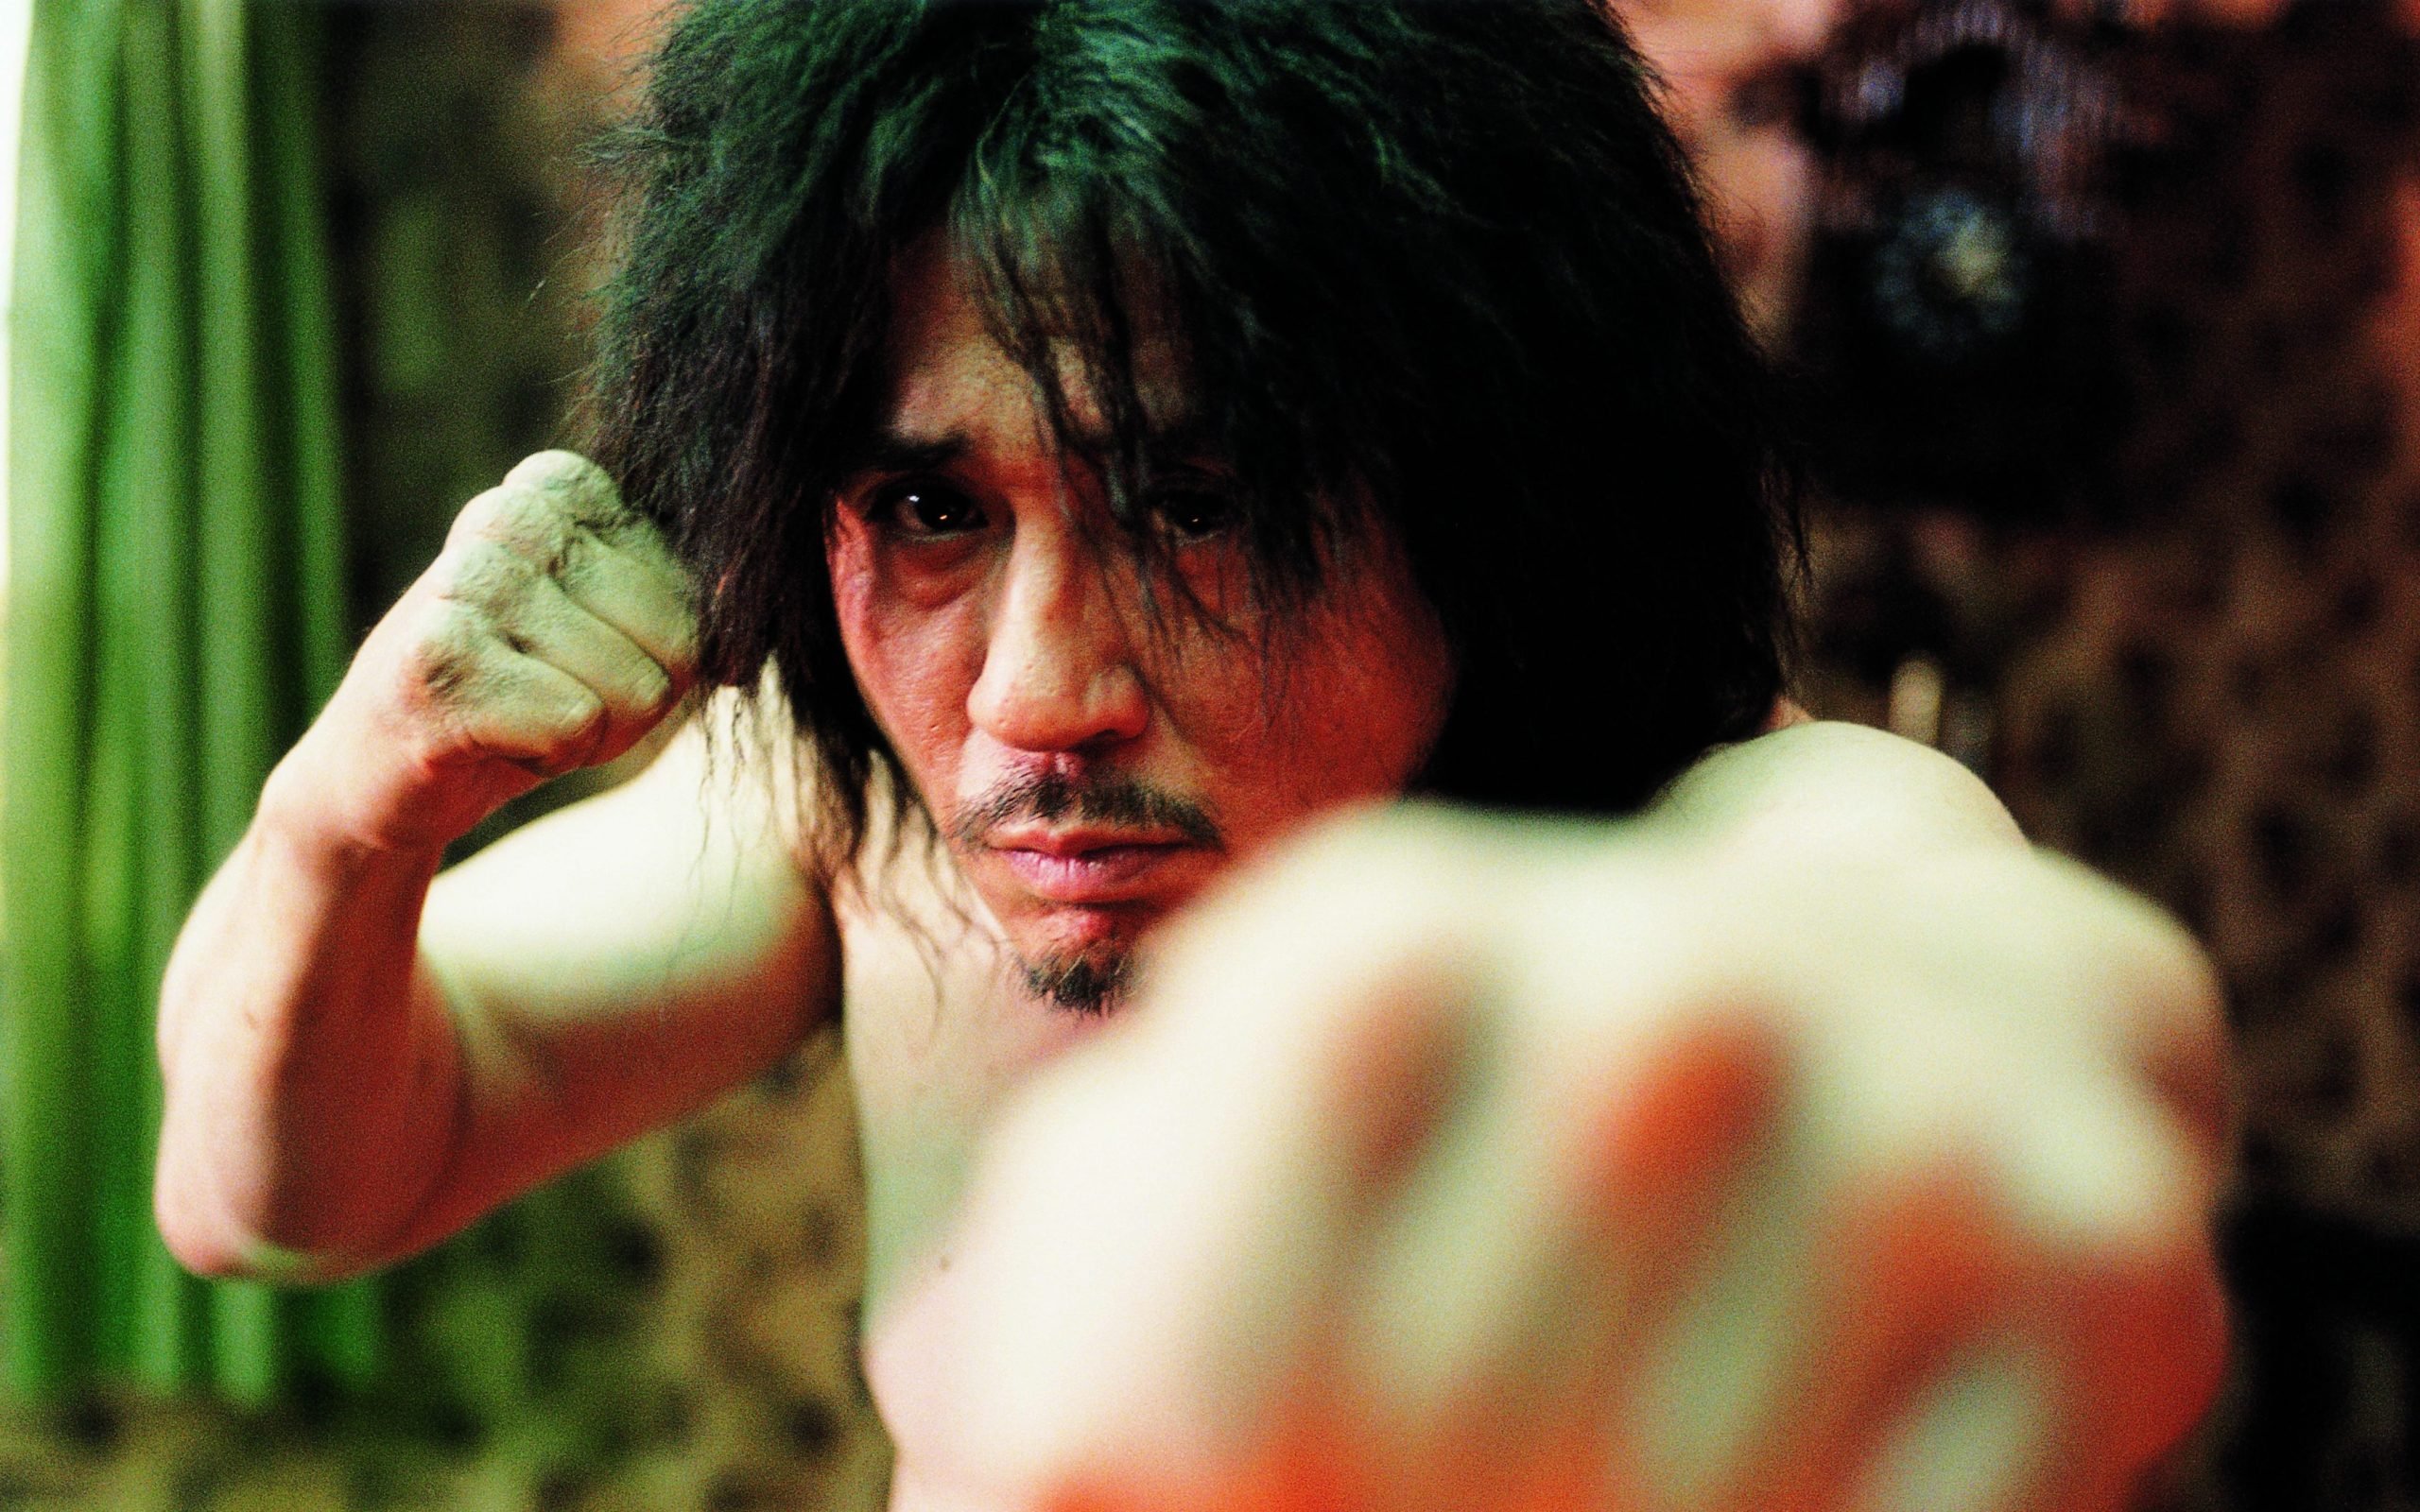 Neon Picks Up U.S. Rights To Park Chan-wook Classic 'Oldboy' – Deadline